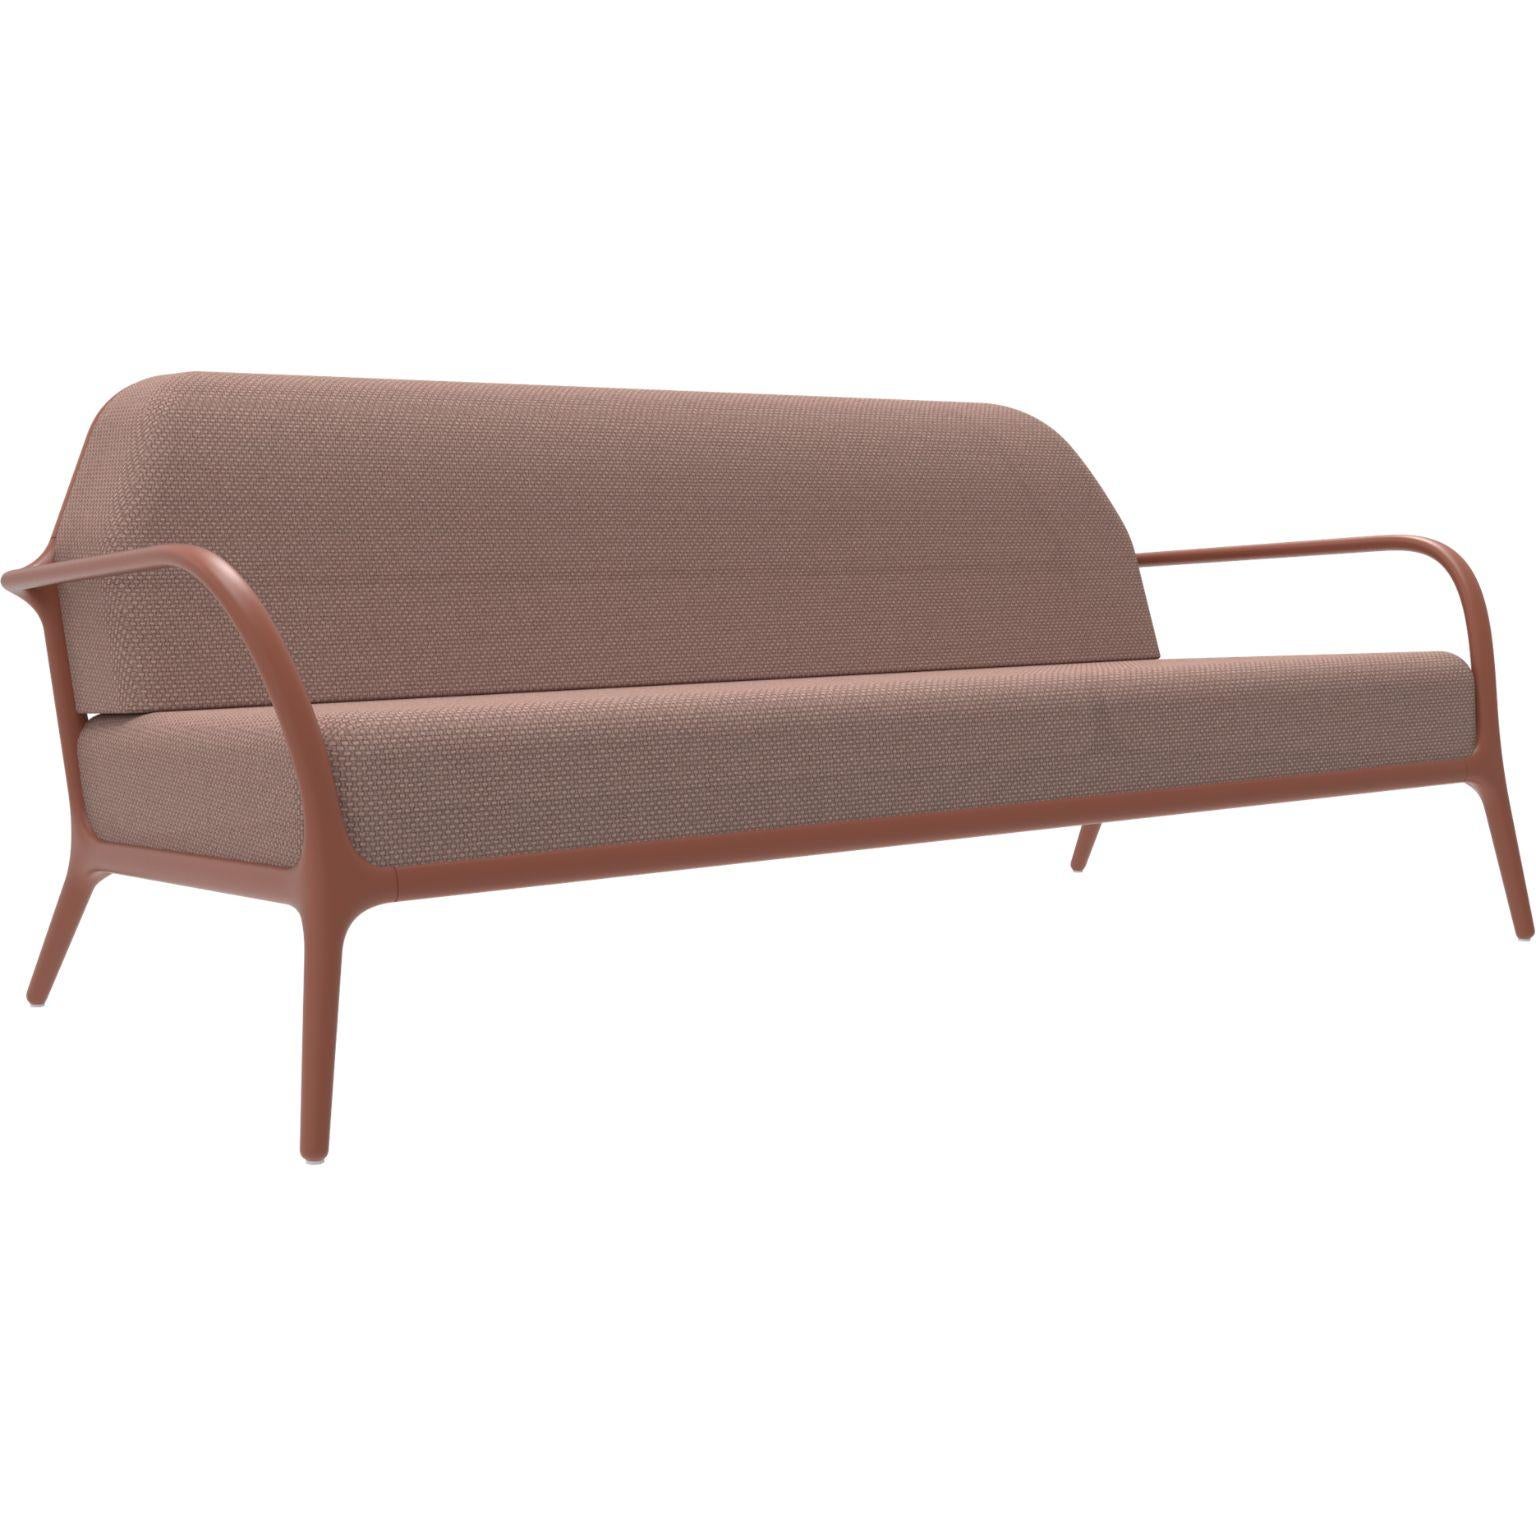 Xaloc Salmon sofa by Mowee
Dimensions: D 100 x W 200 x H 81 cm (Seat height 42 cm)
Material: Aluminium, Textile
Weight: 46 kg
Also available in different colours and finishes.

 Xaloc synthesizes the lines of interior furniture to extrapolate